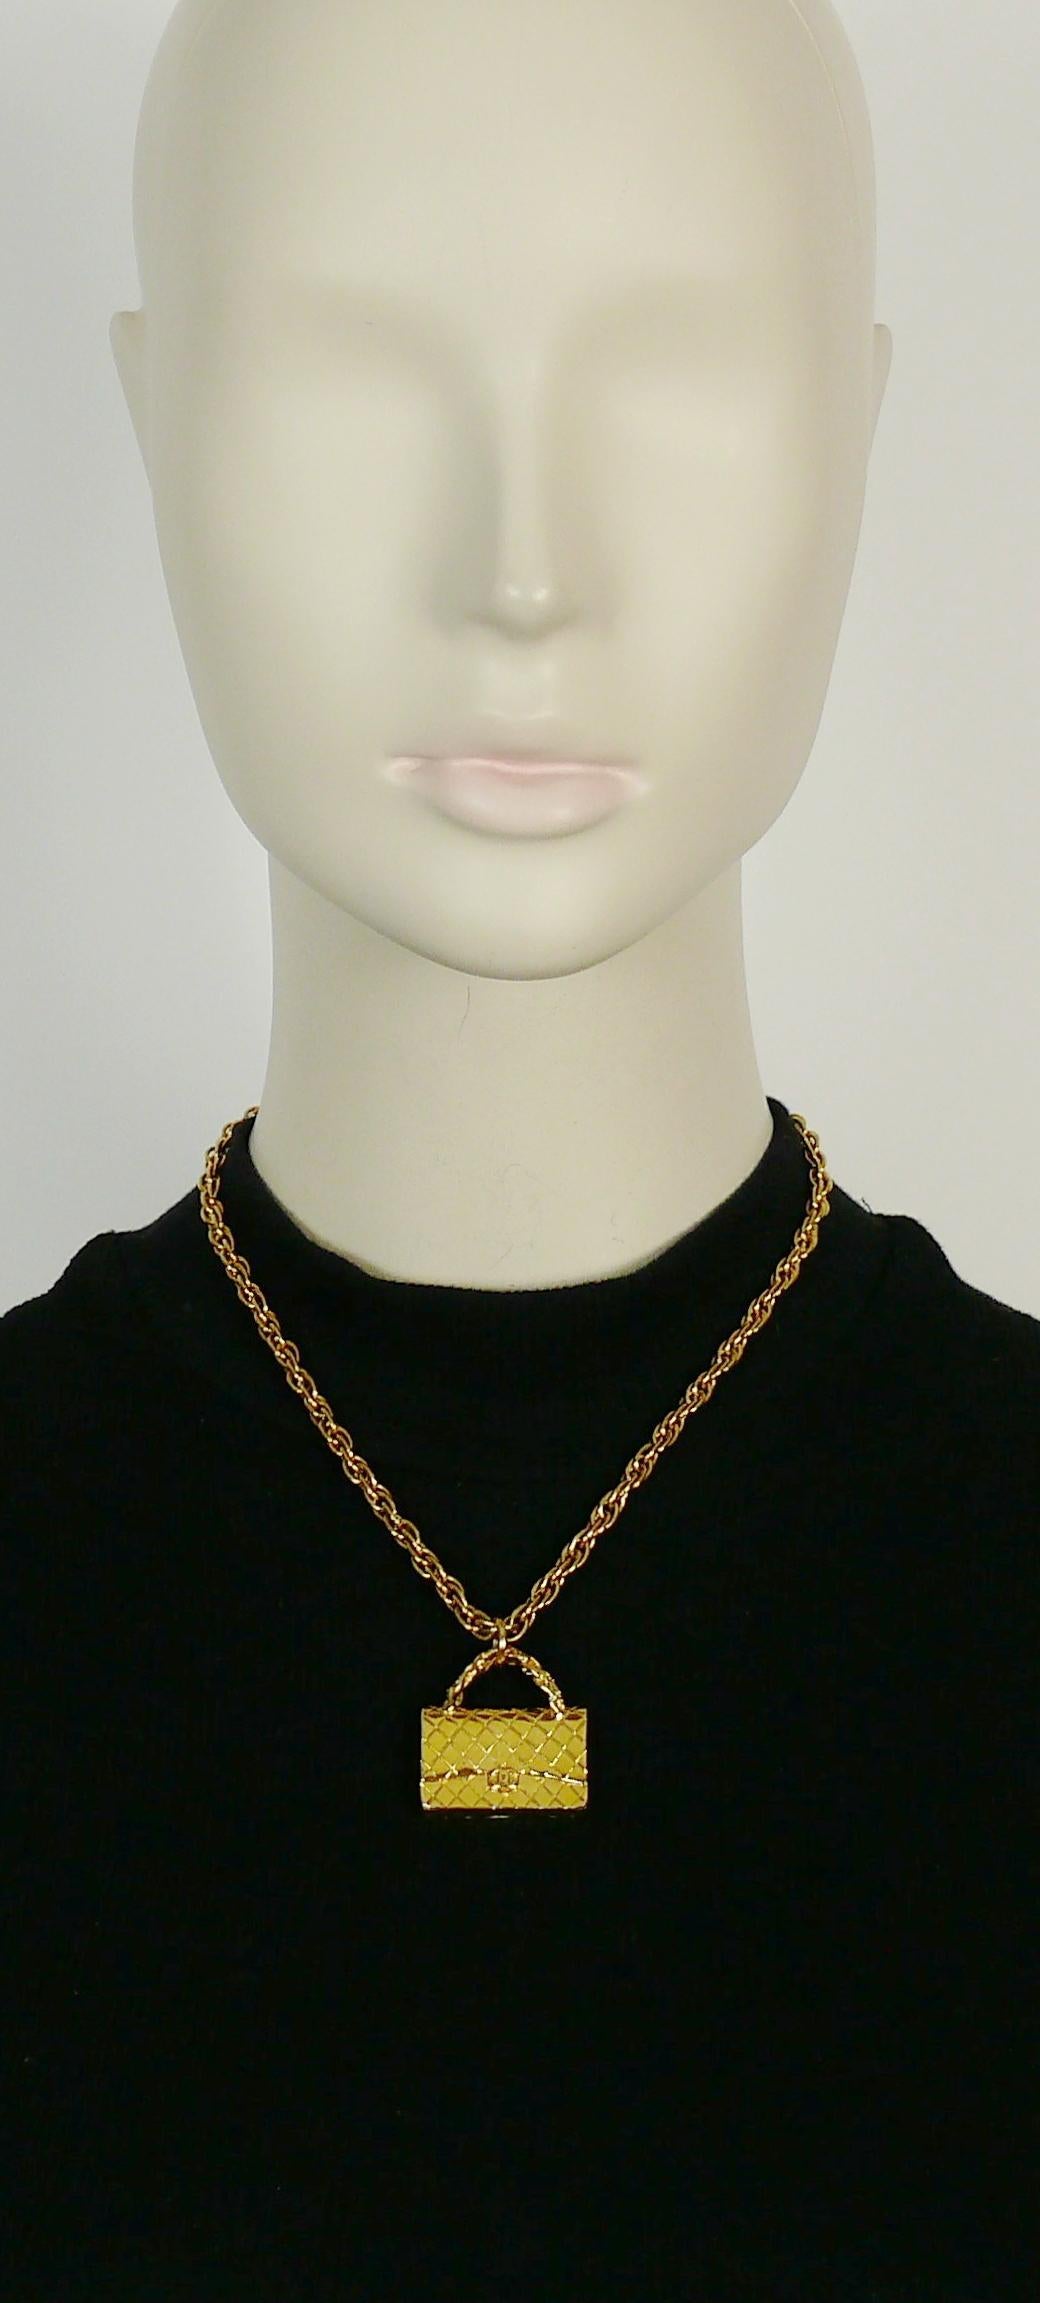 CHANEL vintage 1995 gold toned chain necklace featuring a quilted bag pendant.

Spring clasp closure.

Fall/Winter 1995 Collection.

Embossed CHANEL 95 A MADE IN FRANCE.

Indicative measurements : chain length approx. 42.5 cm (16.73 inches) / bag